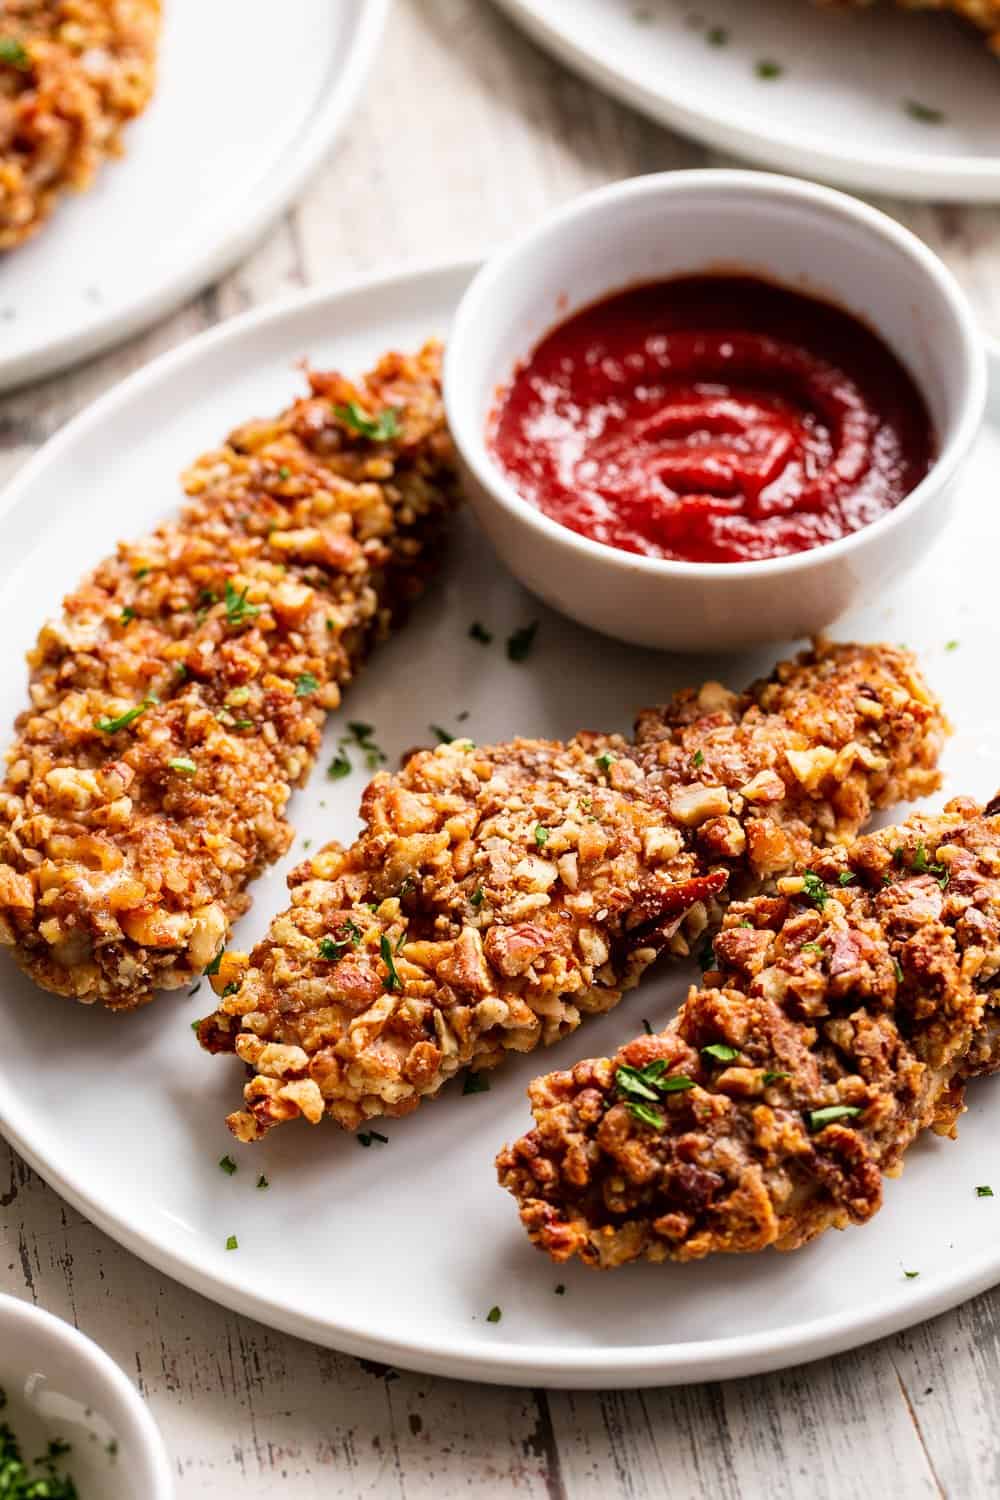 These pecan crusted chicken tenders are easy to throw together, baked in the oven and so tasty! Amazing with all your favorite dips and totally kid friendly, they're also paleo, Whole30 and keto friendly. #paleo #keto #cleaneating #chicken #whole30